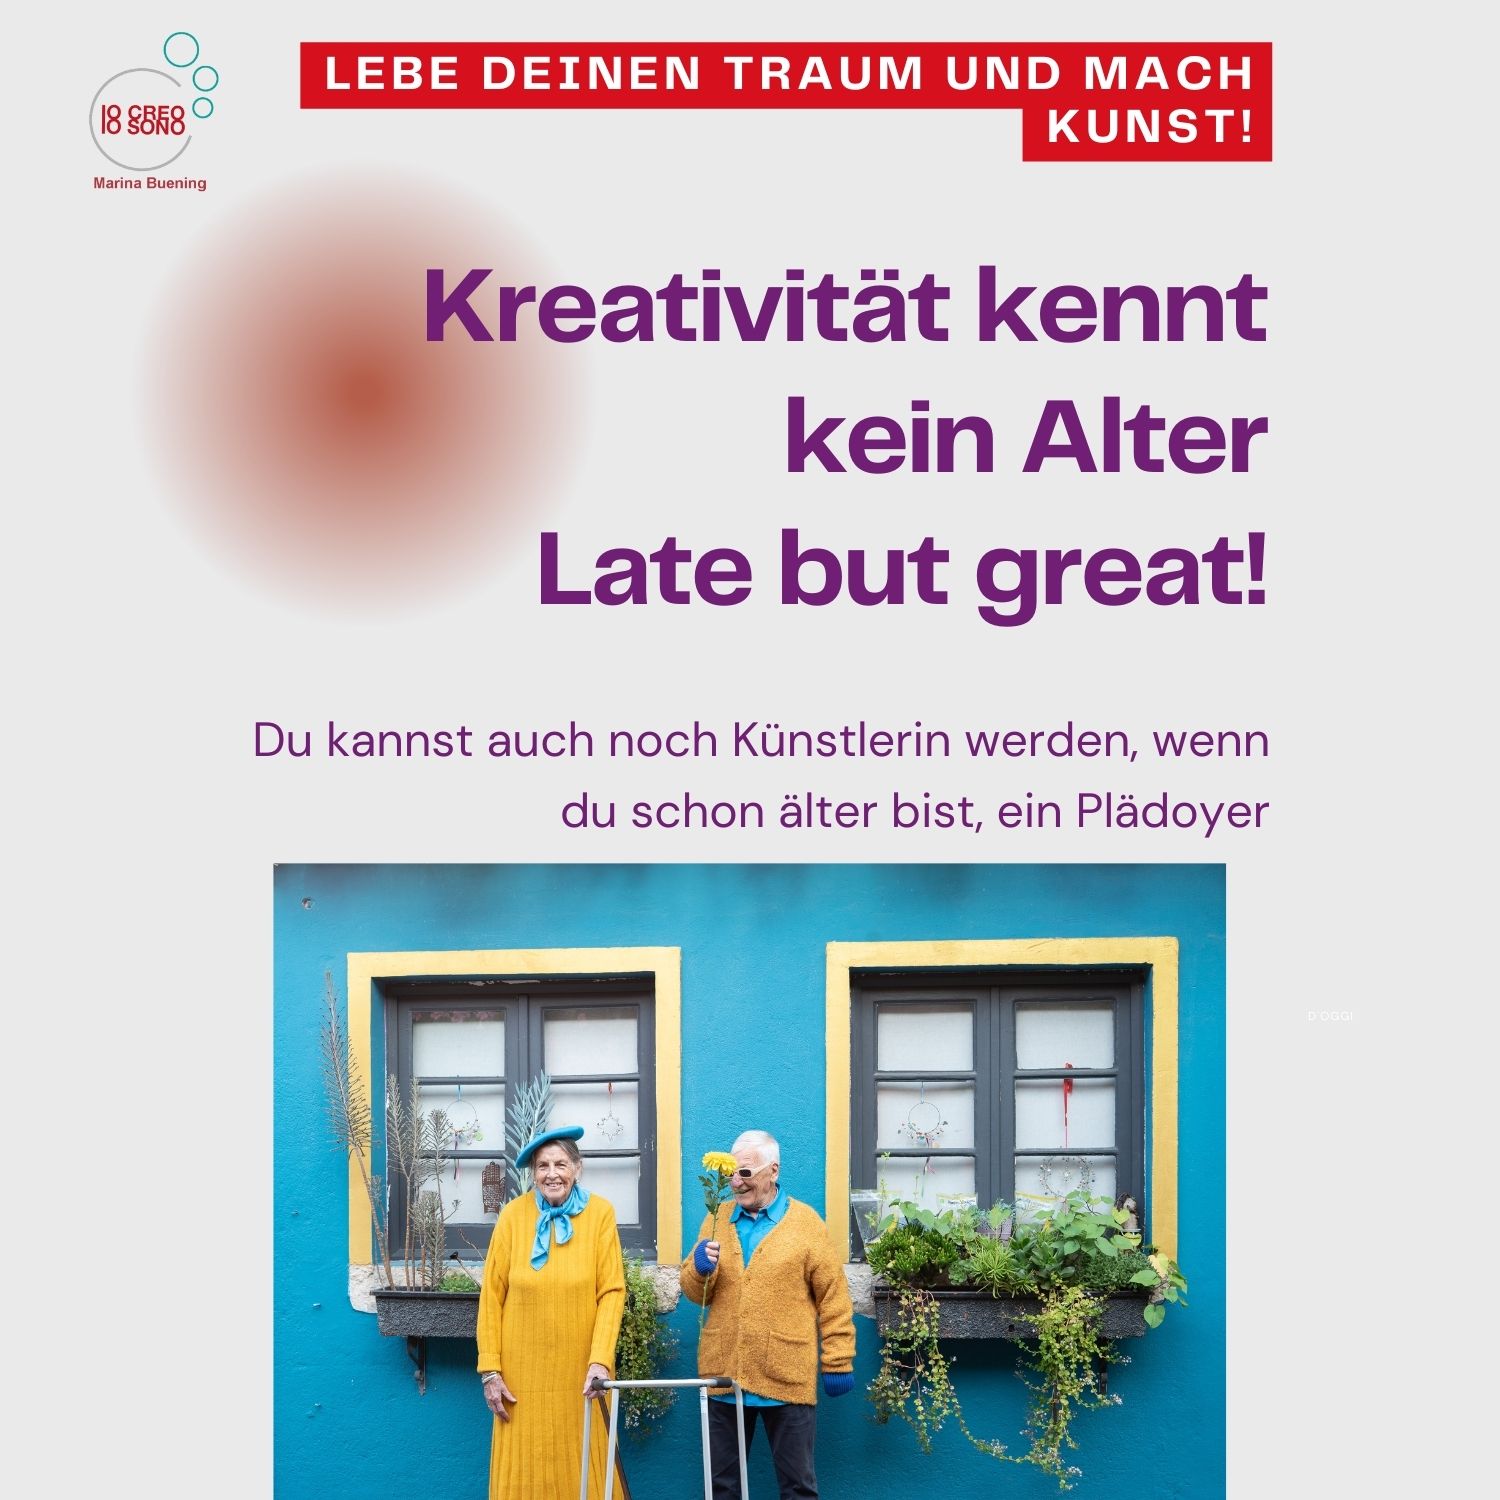 Not too late to be great, Kreativität kennt kein Alter!